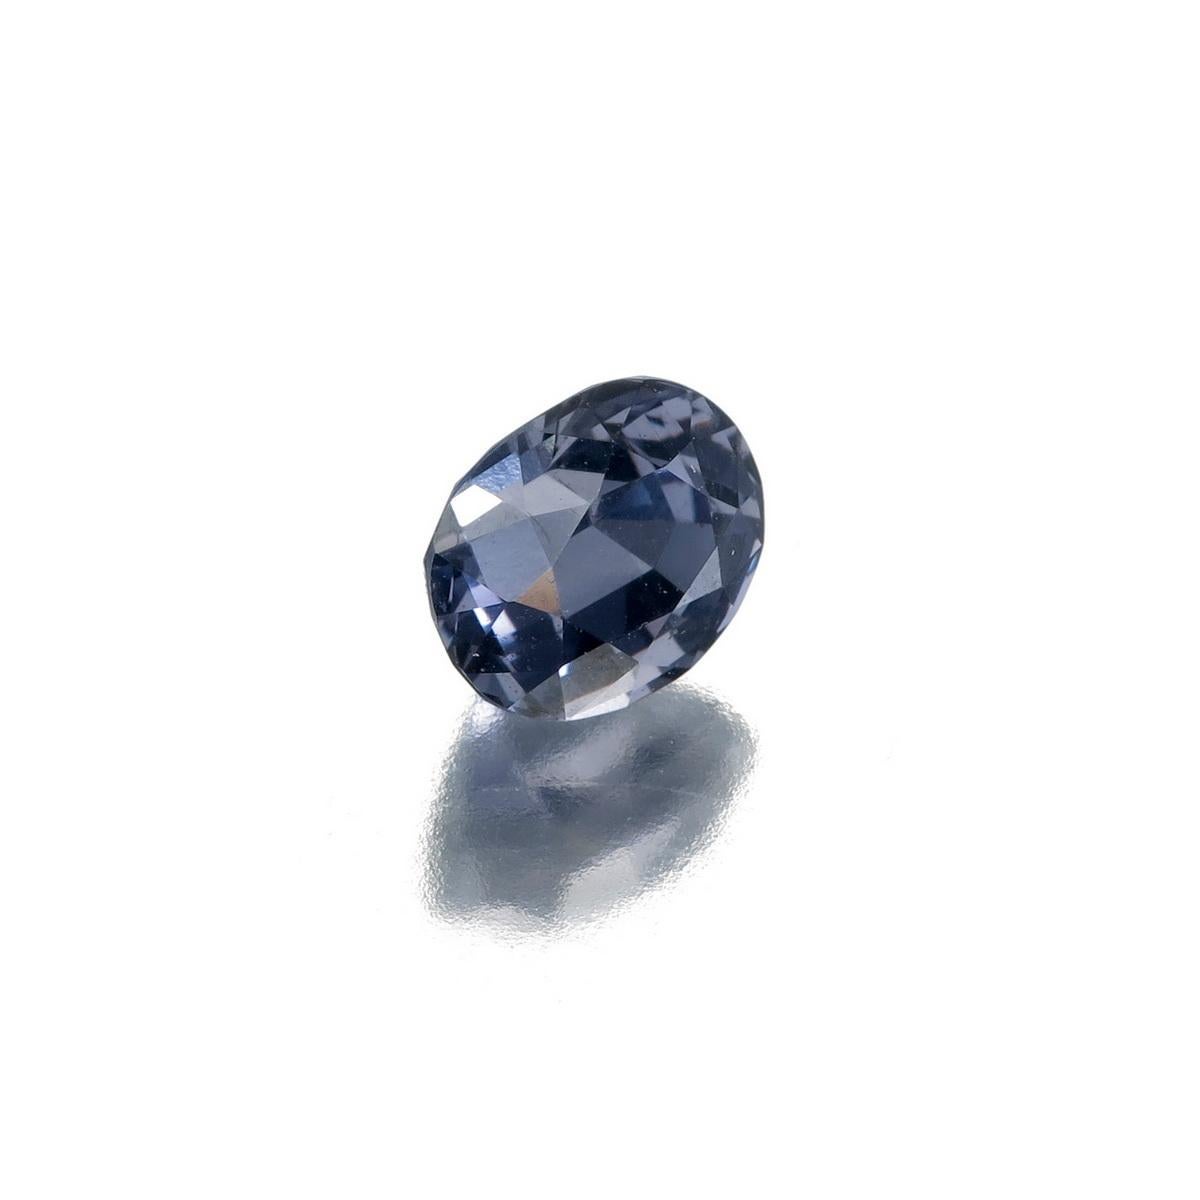 1.98 Carat Natural Blue Cobalt Spinel from Burma
Dimension: 7.68 x 6.35 x 5.28 mm
Shape: Oval Cut
Weight: 1.98 Carat
No Heat
GIL Certified Report No: St02022102151324